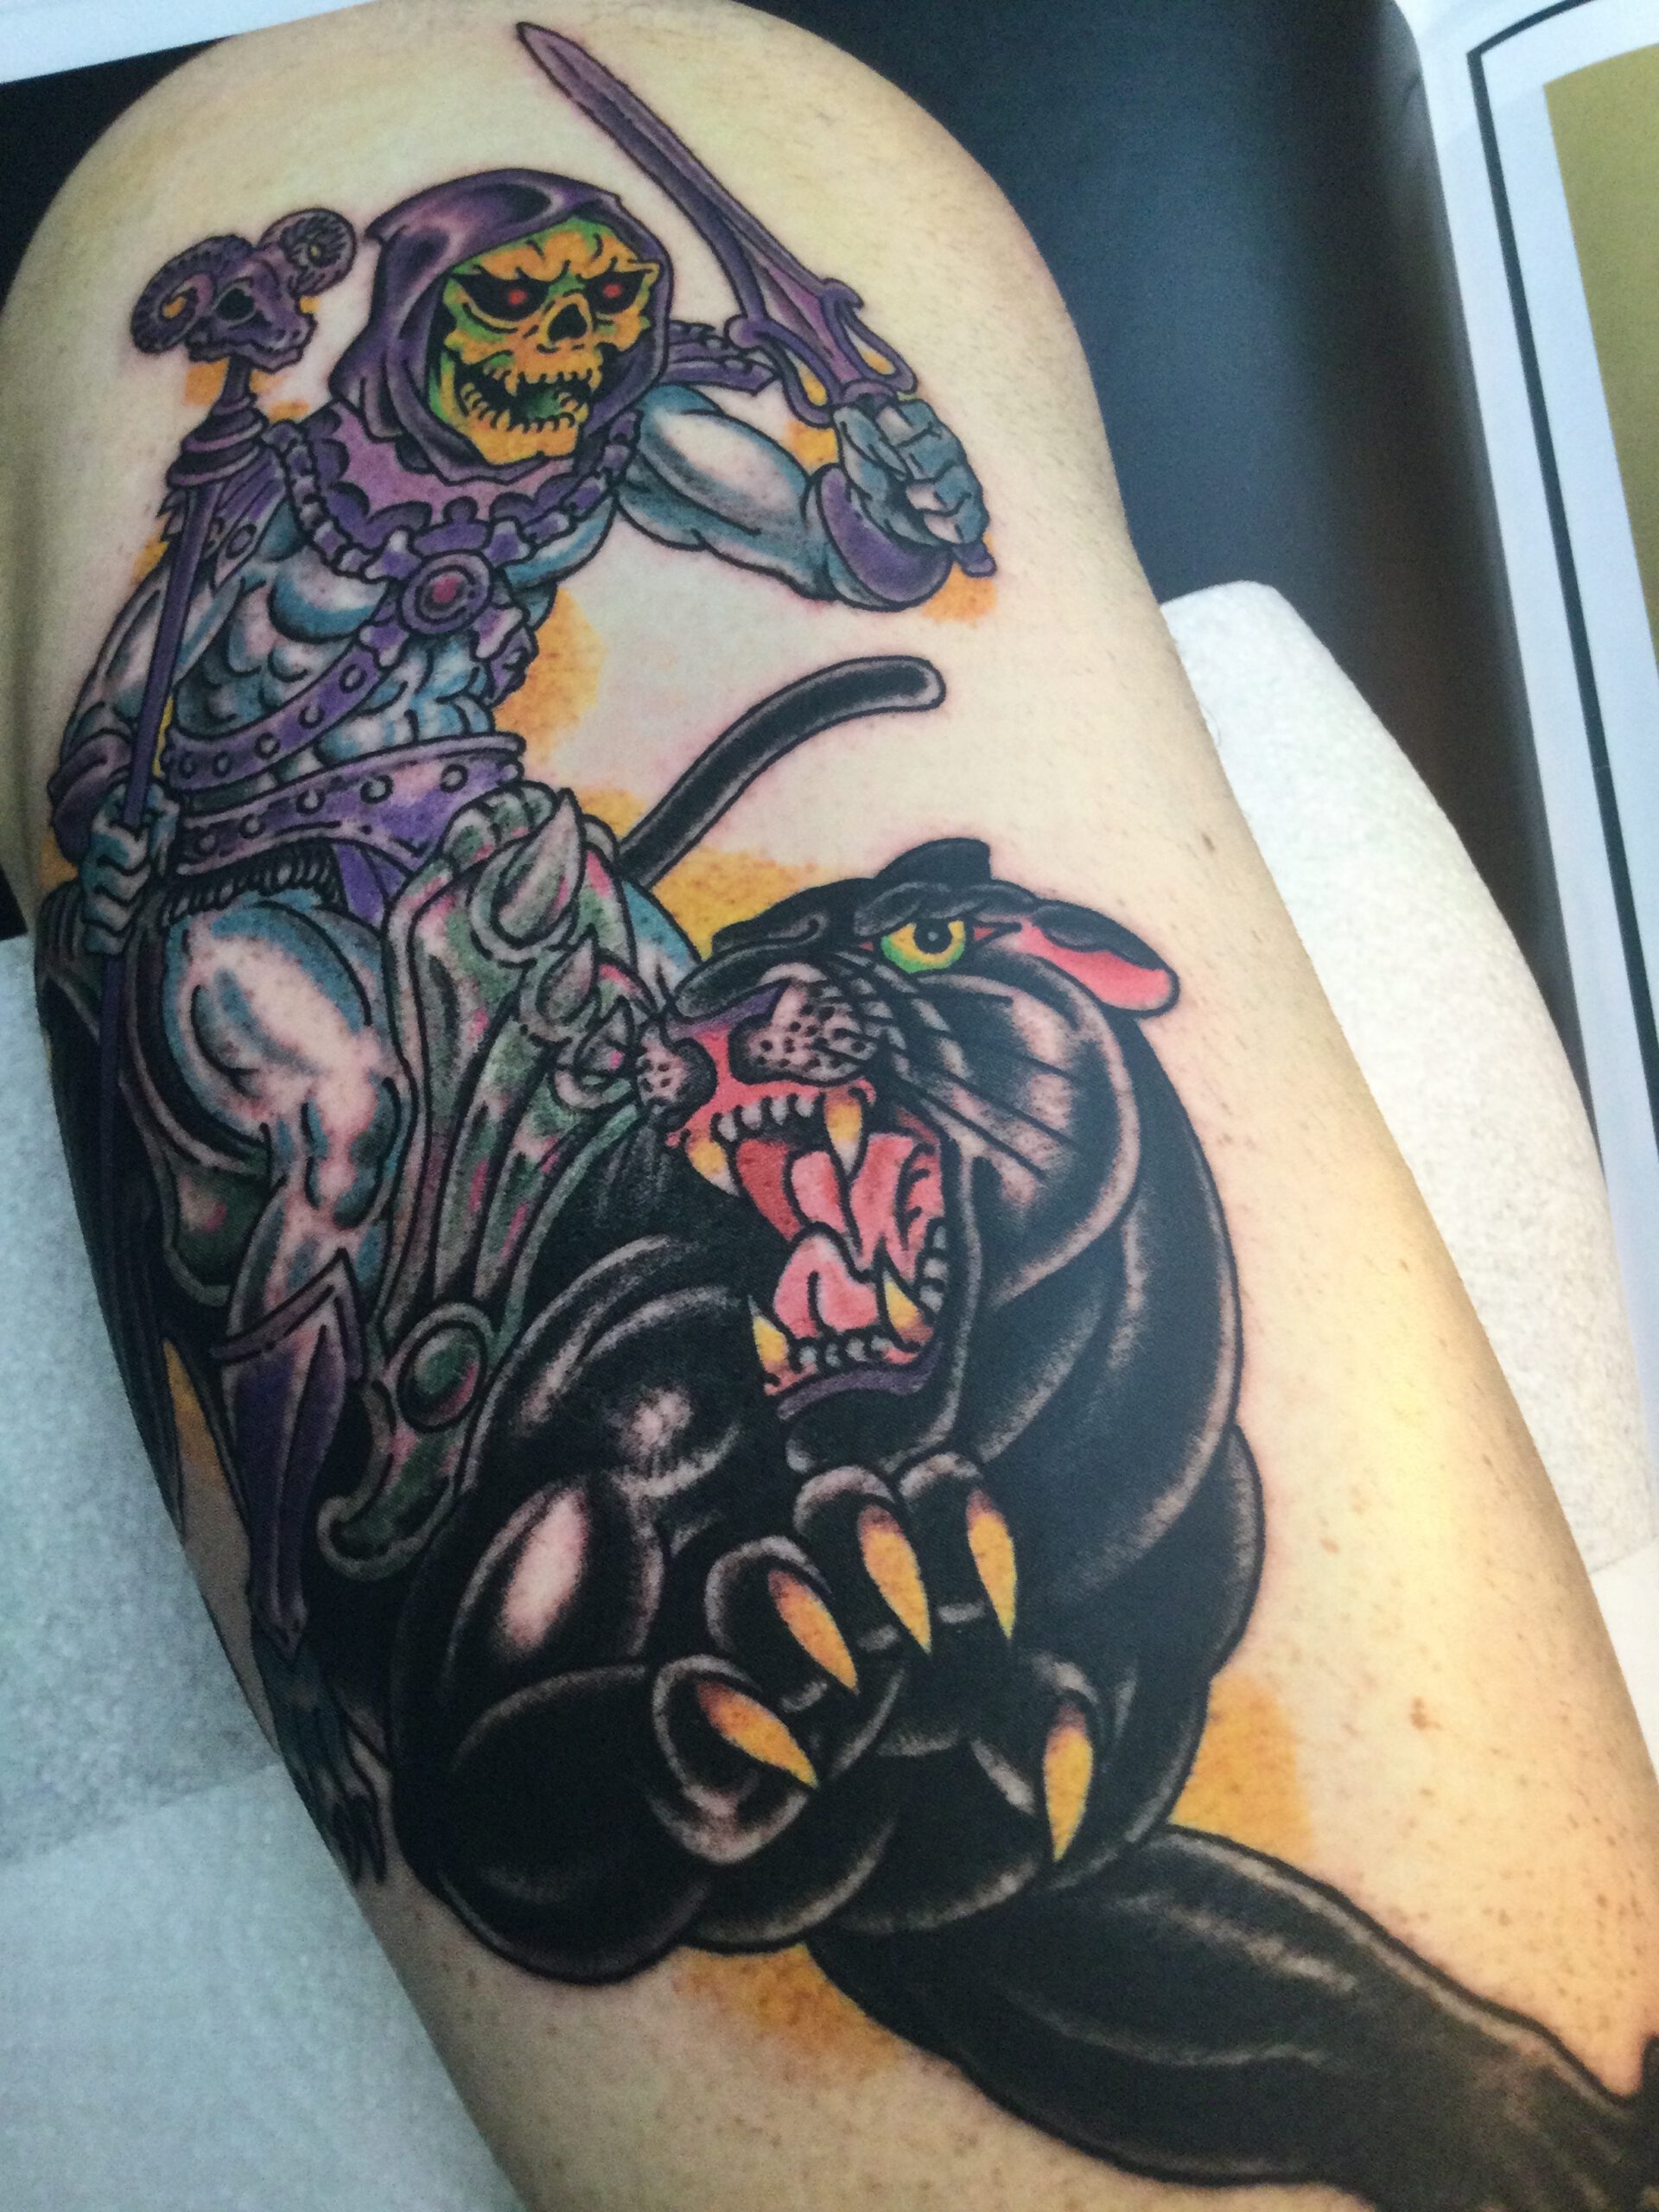 Skeletor from Masters of the universe on Panter Tattoo. The work is made over the complete hip.